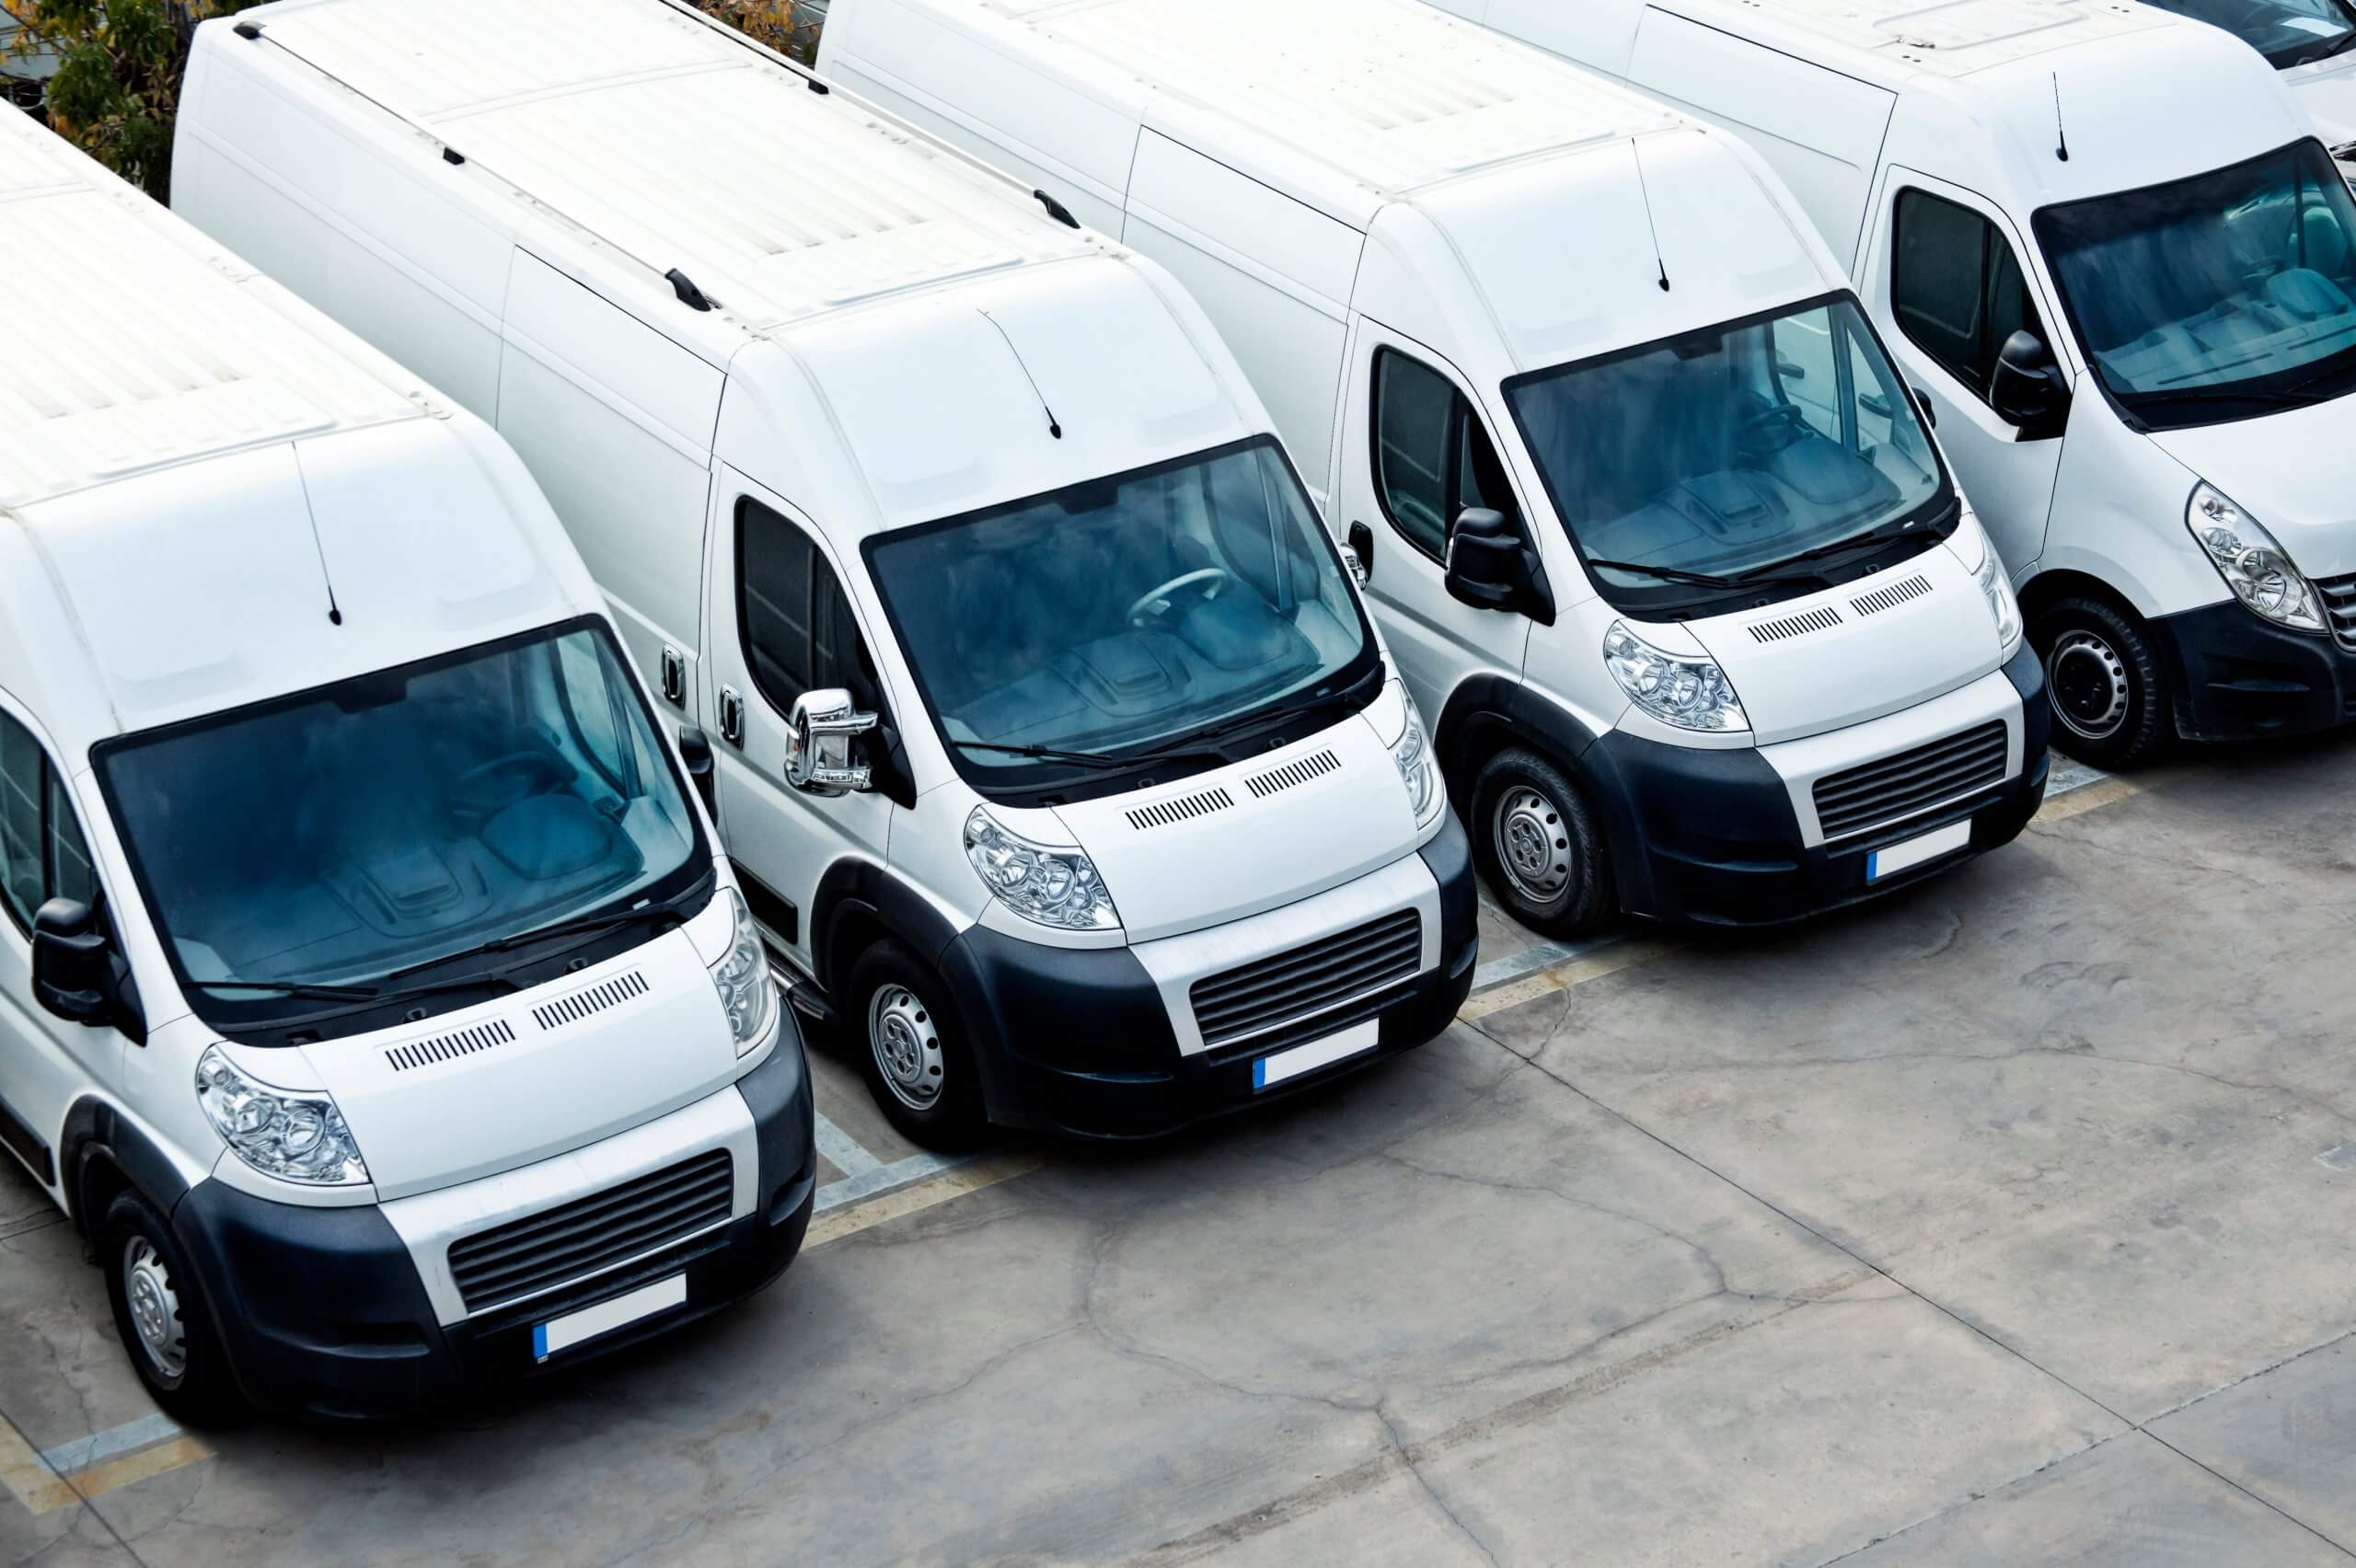 Row of Commercial Vans Parked